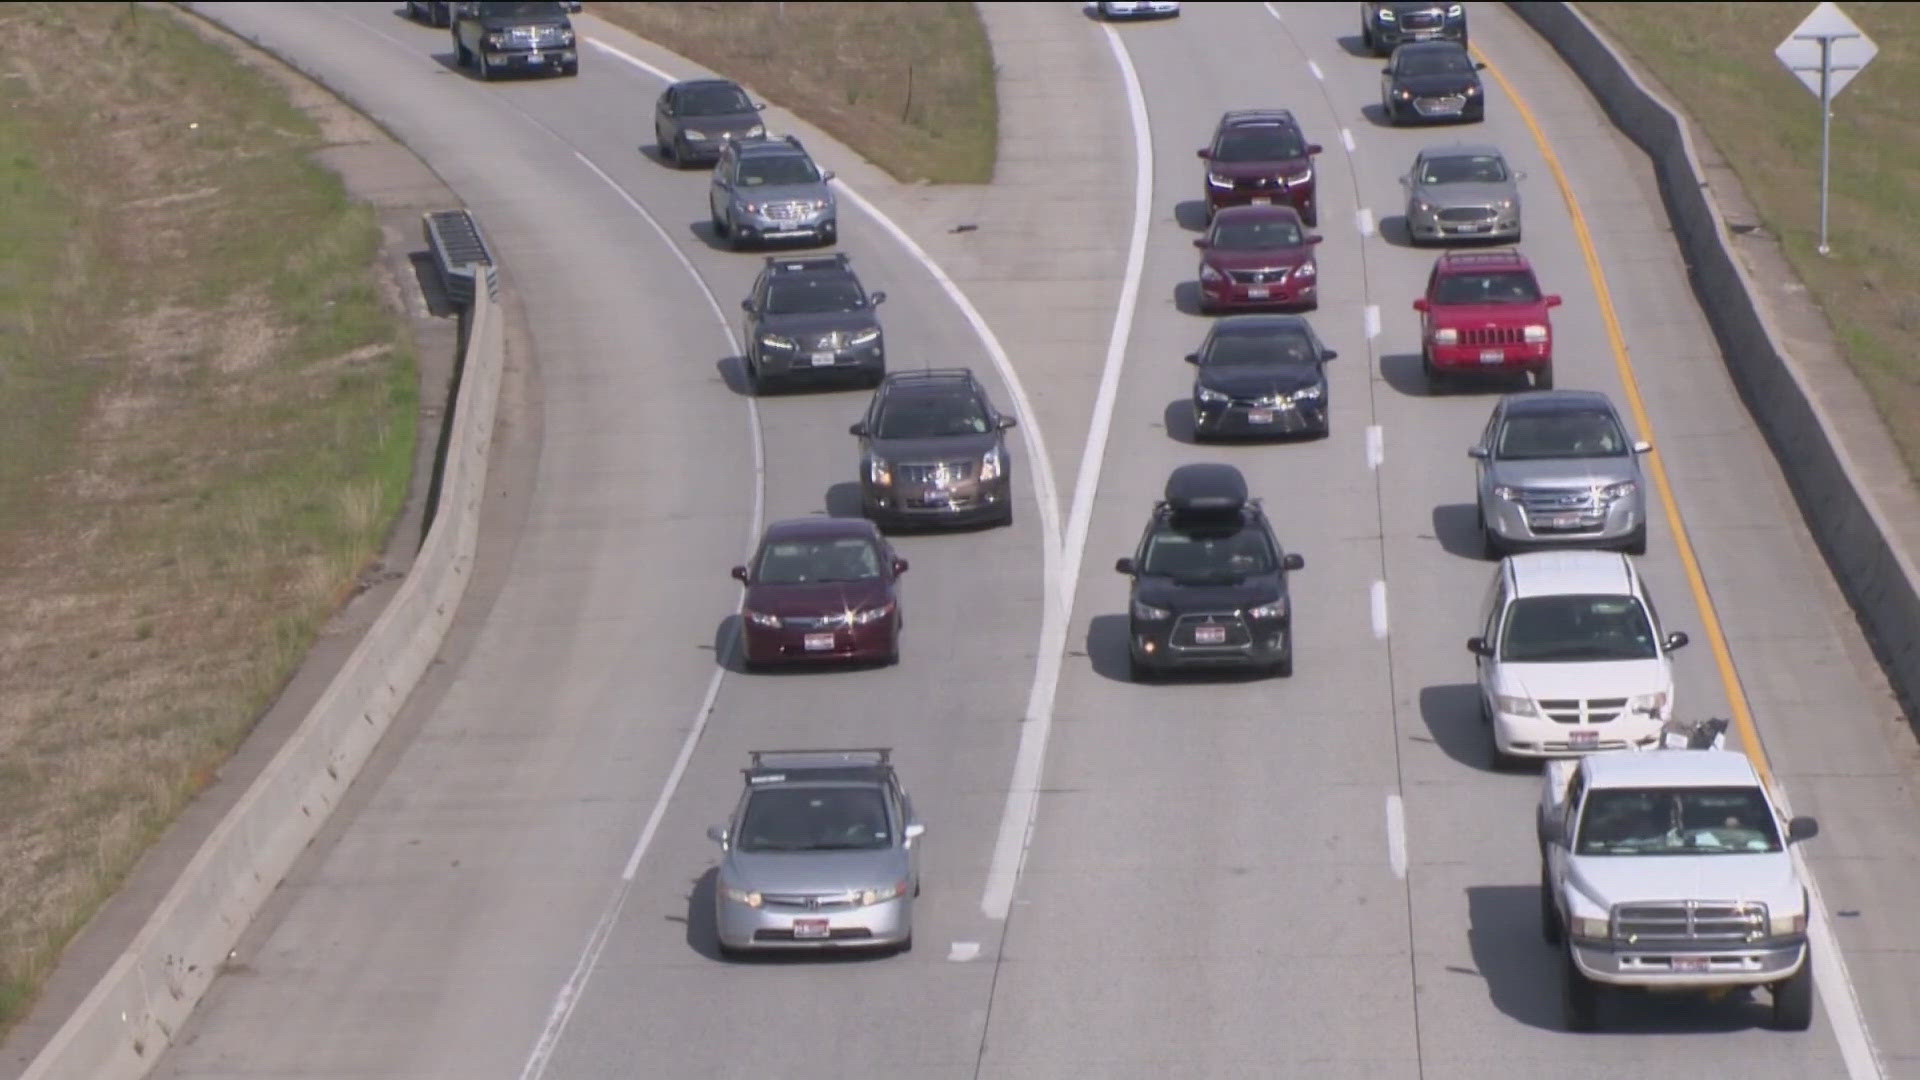 KTVB spoke with experts about how to merge on Idaho roads safely.